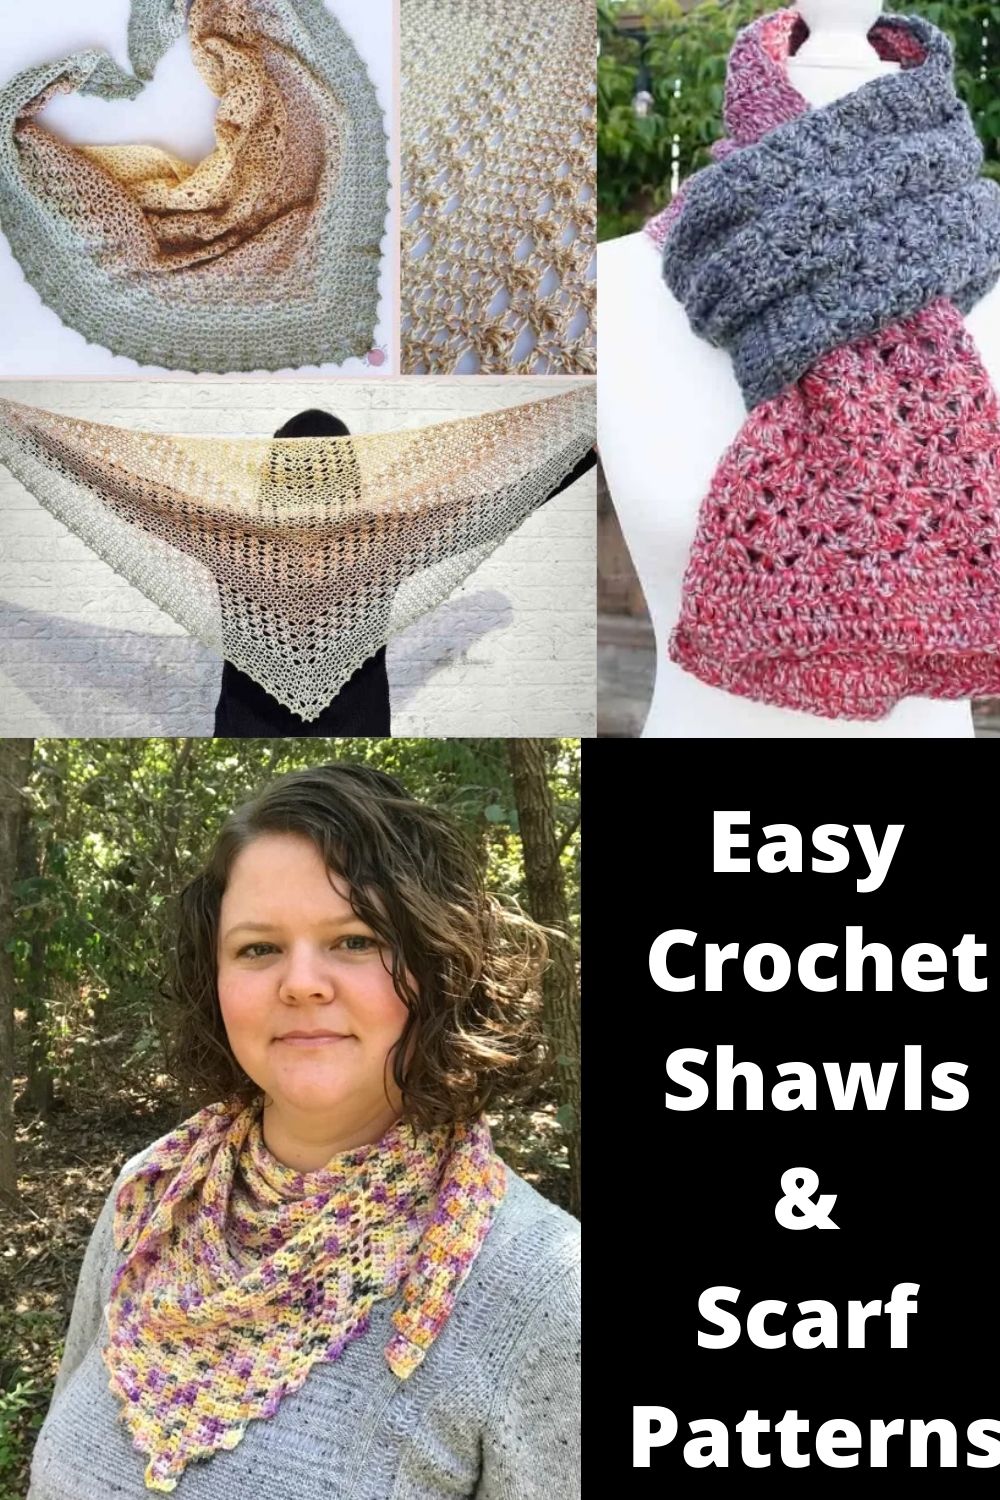 30 + Free One skein Crochet projects for the new year - Fosbas Designs